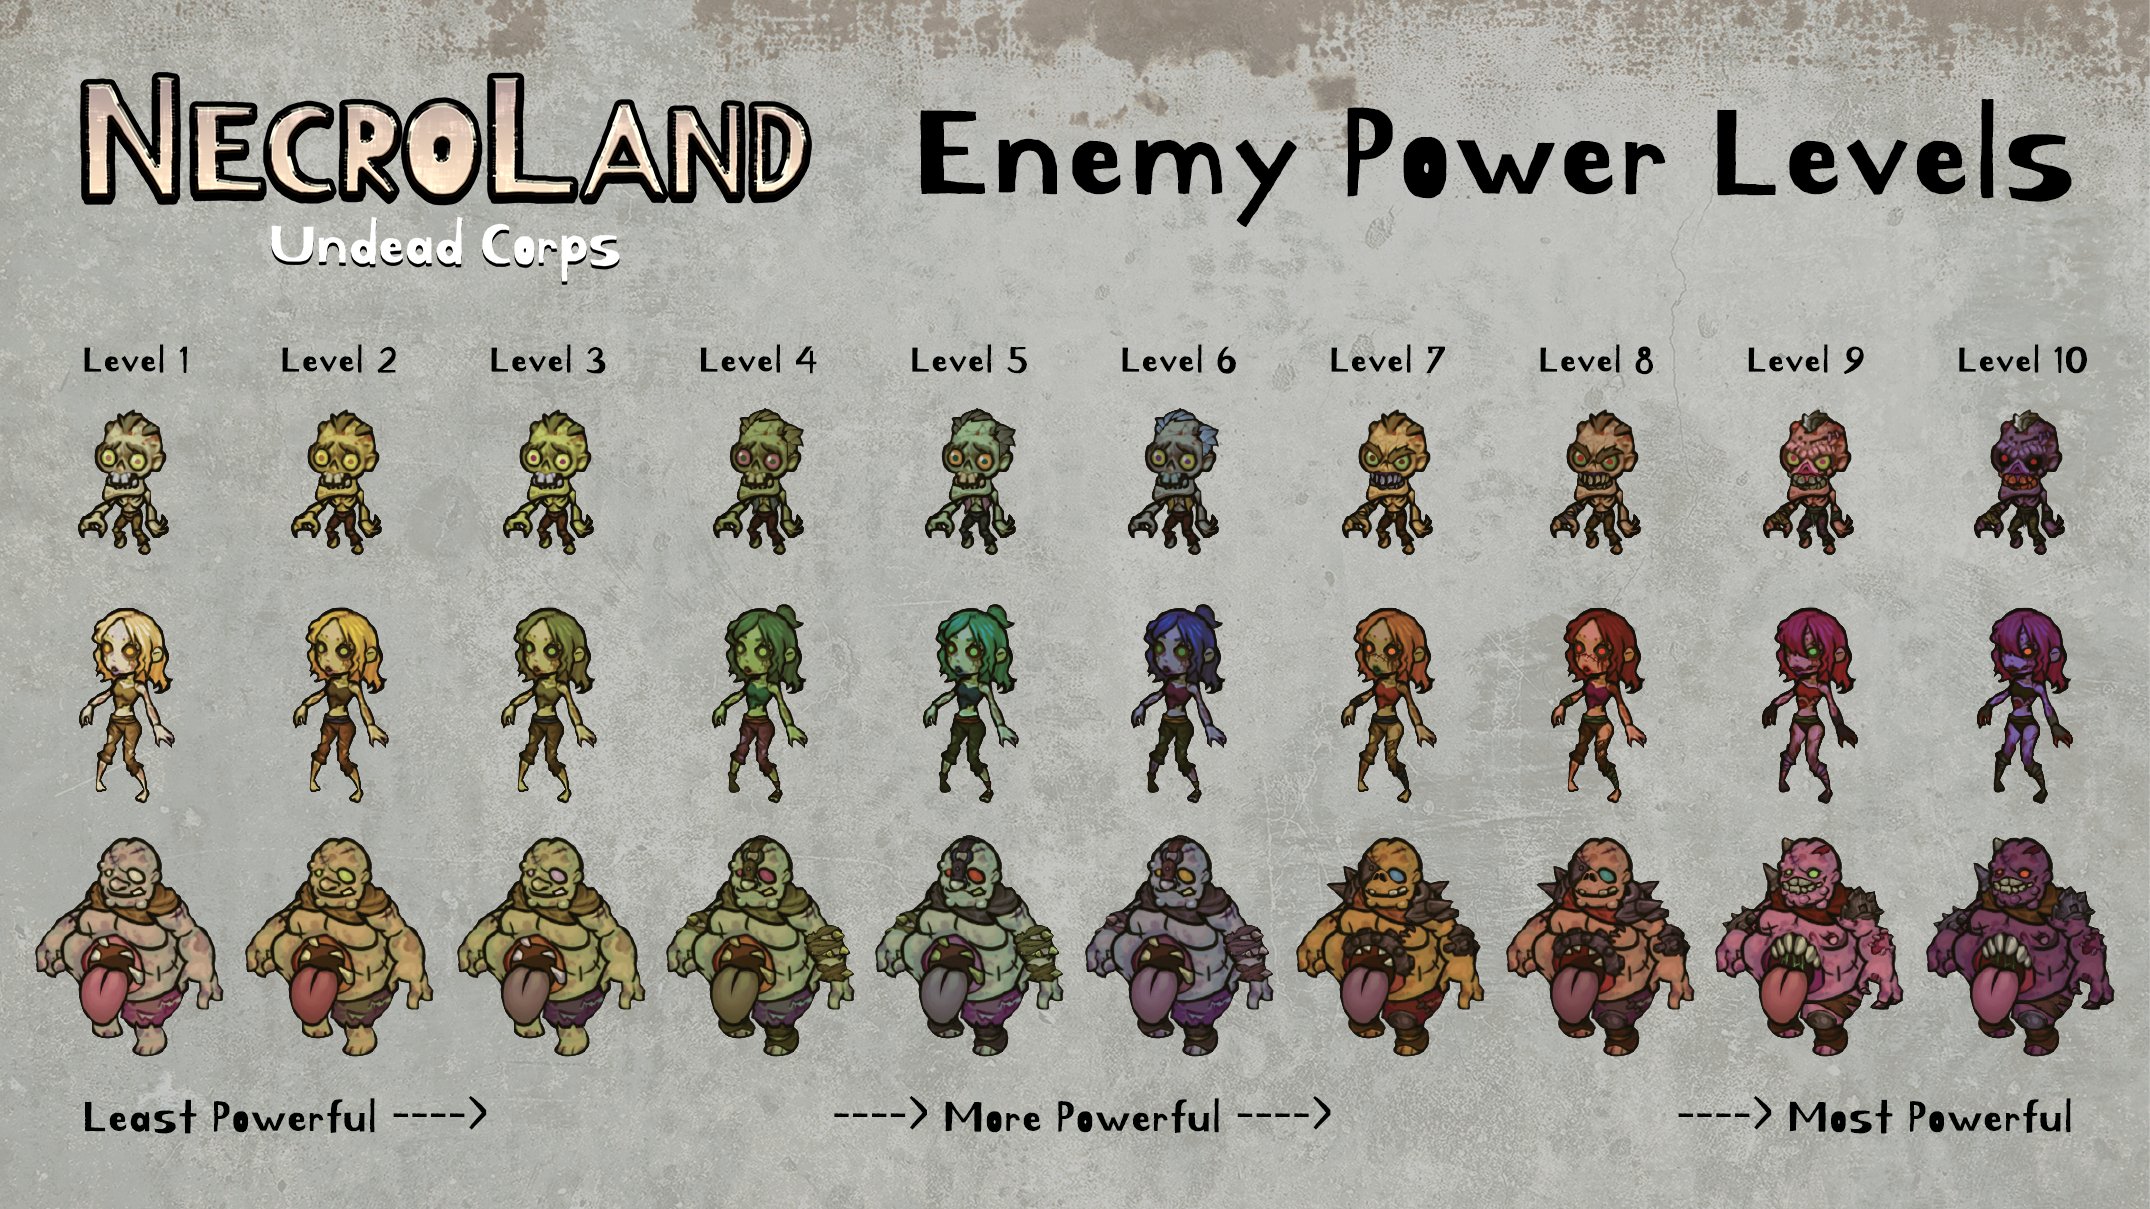 Nicalis Inc Learn To Recognize The More Dangerous Enemies In Necroland Undead Corps Available Now On Steam And At The Epic Games Store T Co J4id7j9rjs T Co Knsxffhnia Twitter